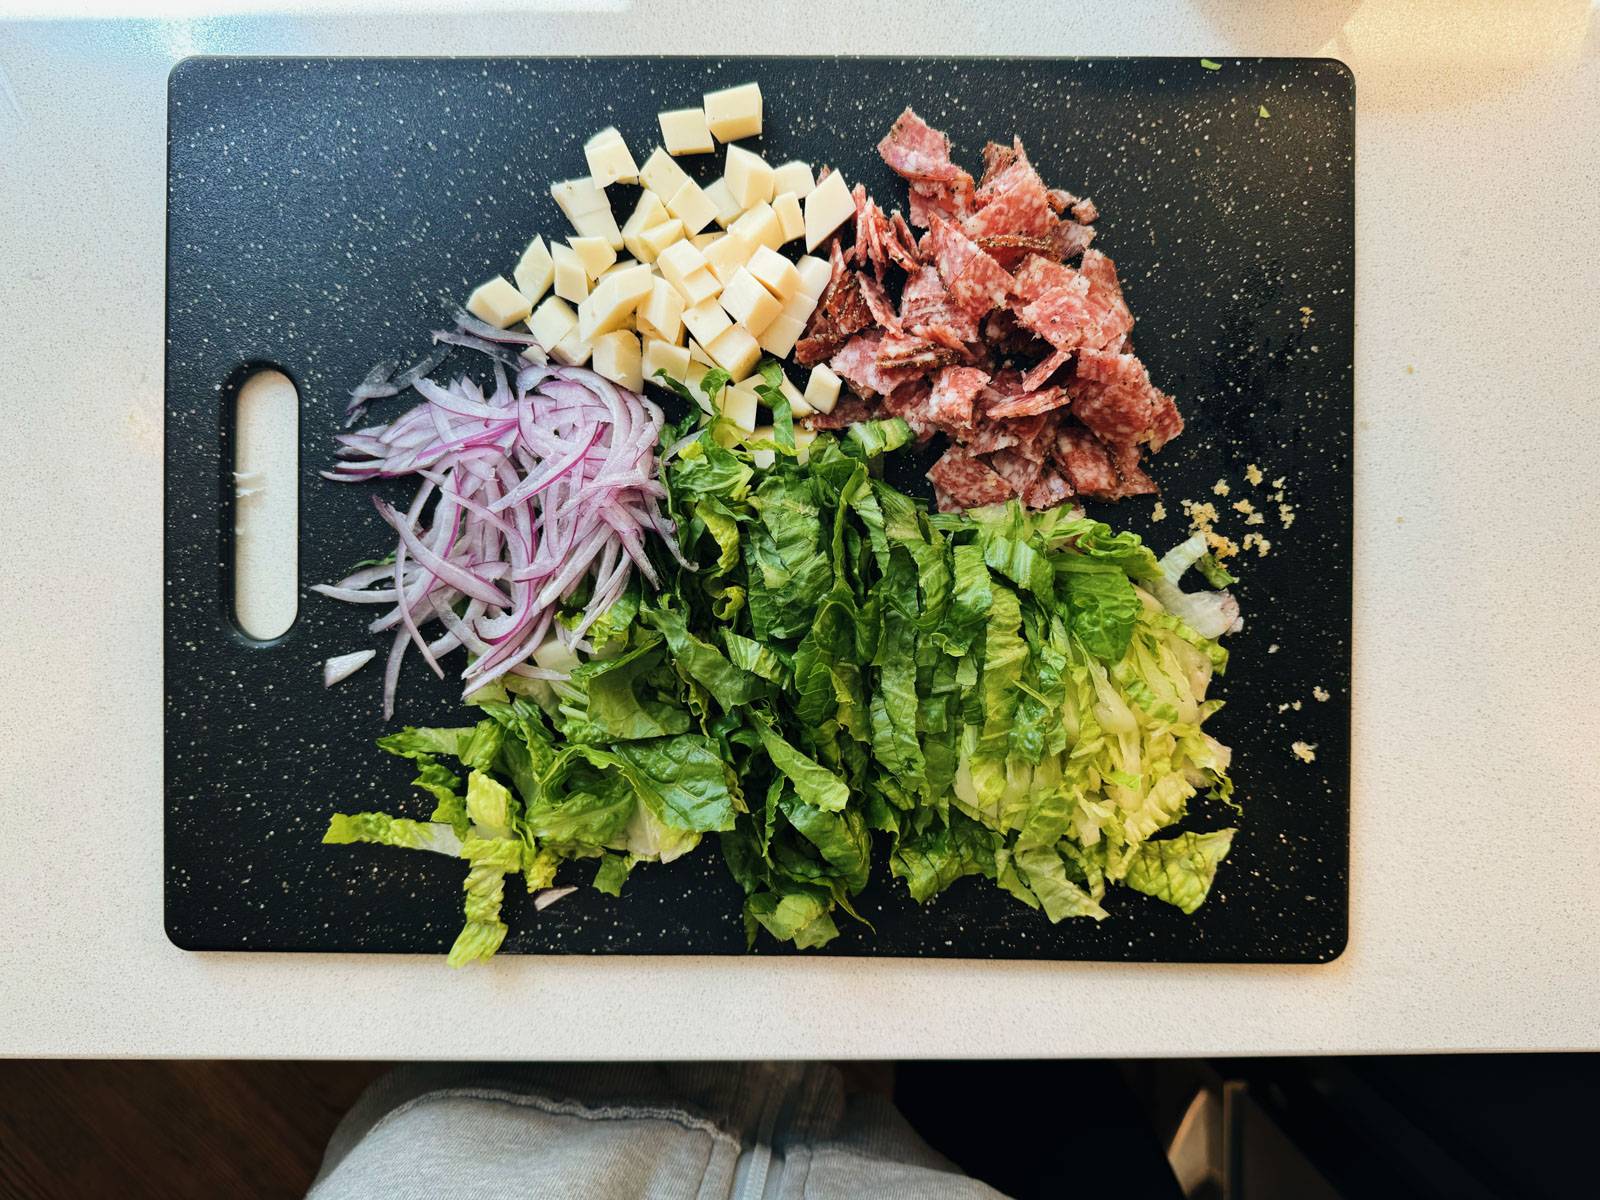 Chopped salad ingredients on a cutting board - romaine, red onion, cheese, and salami.